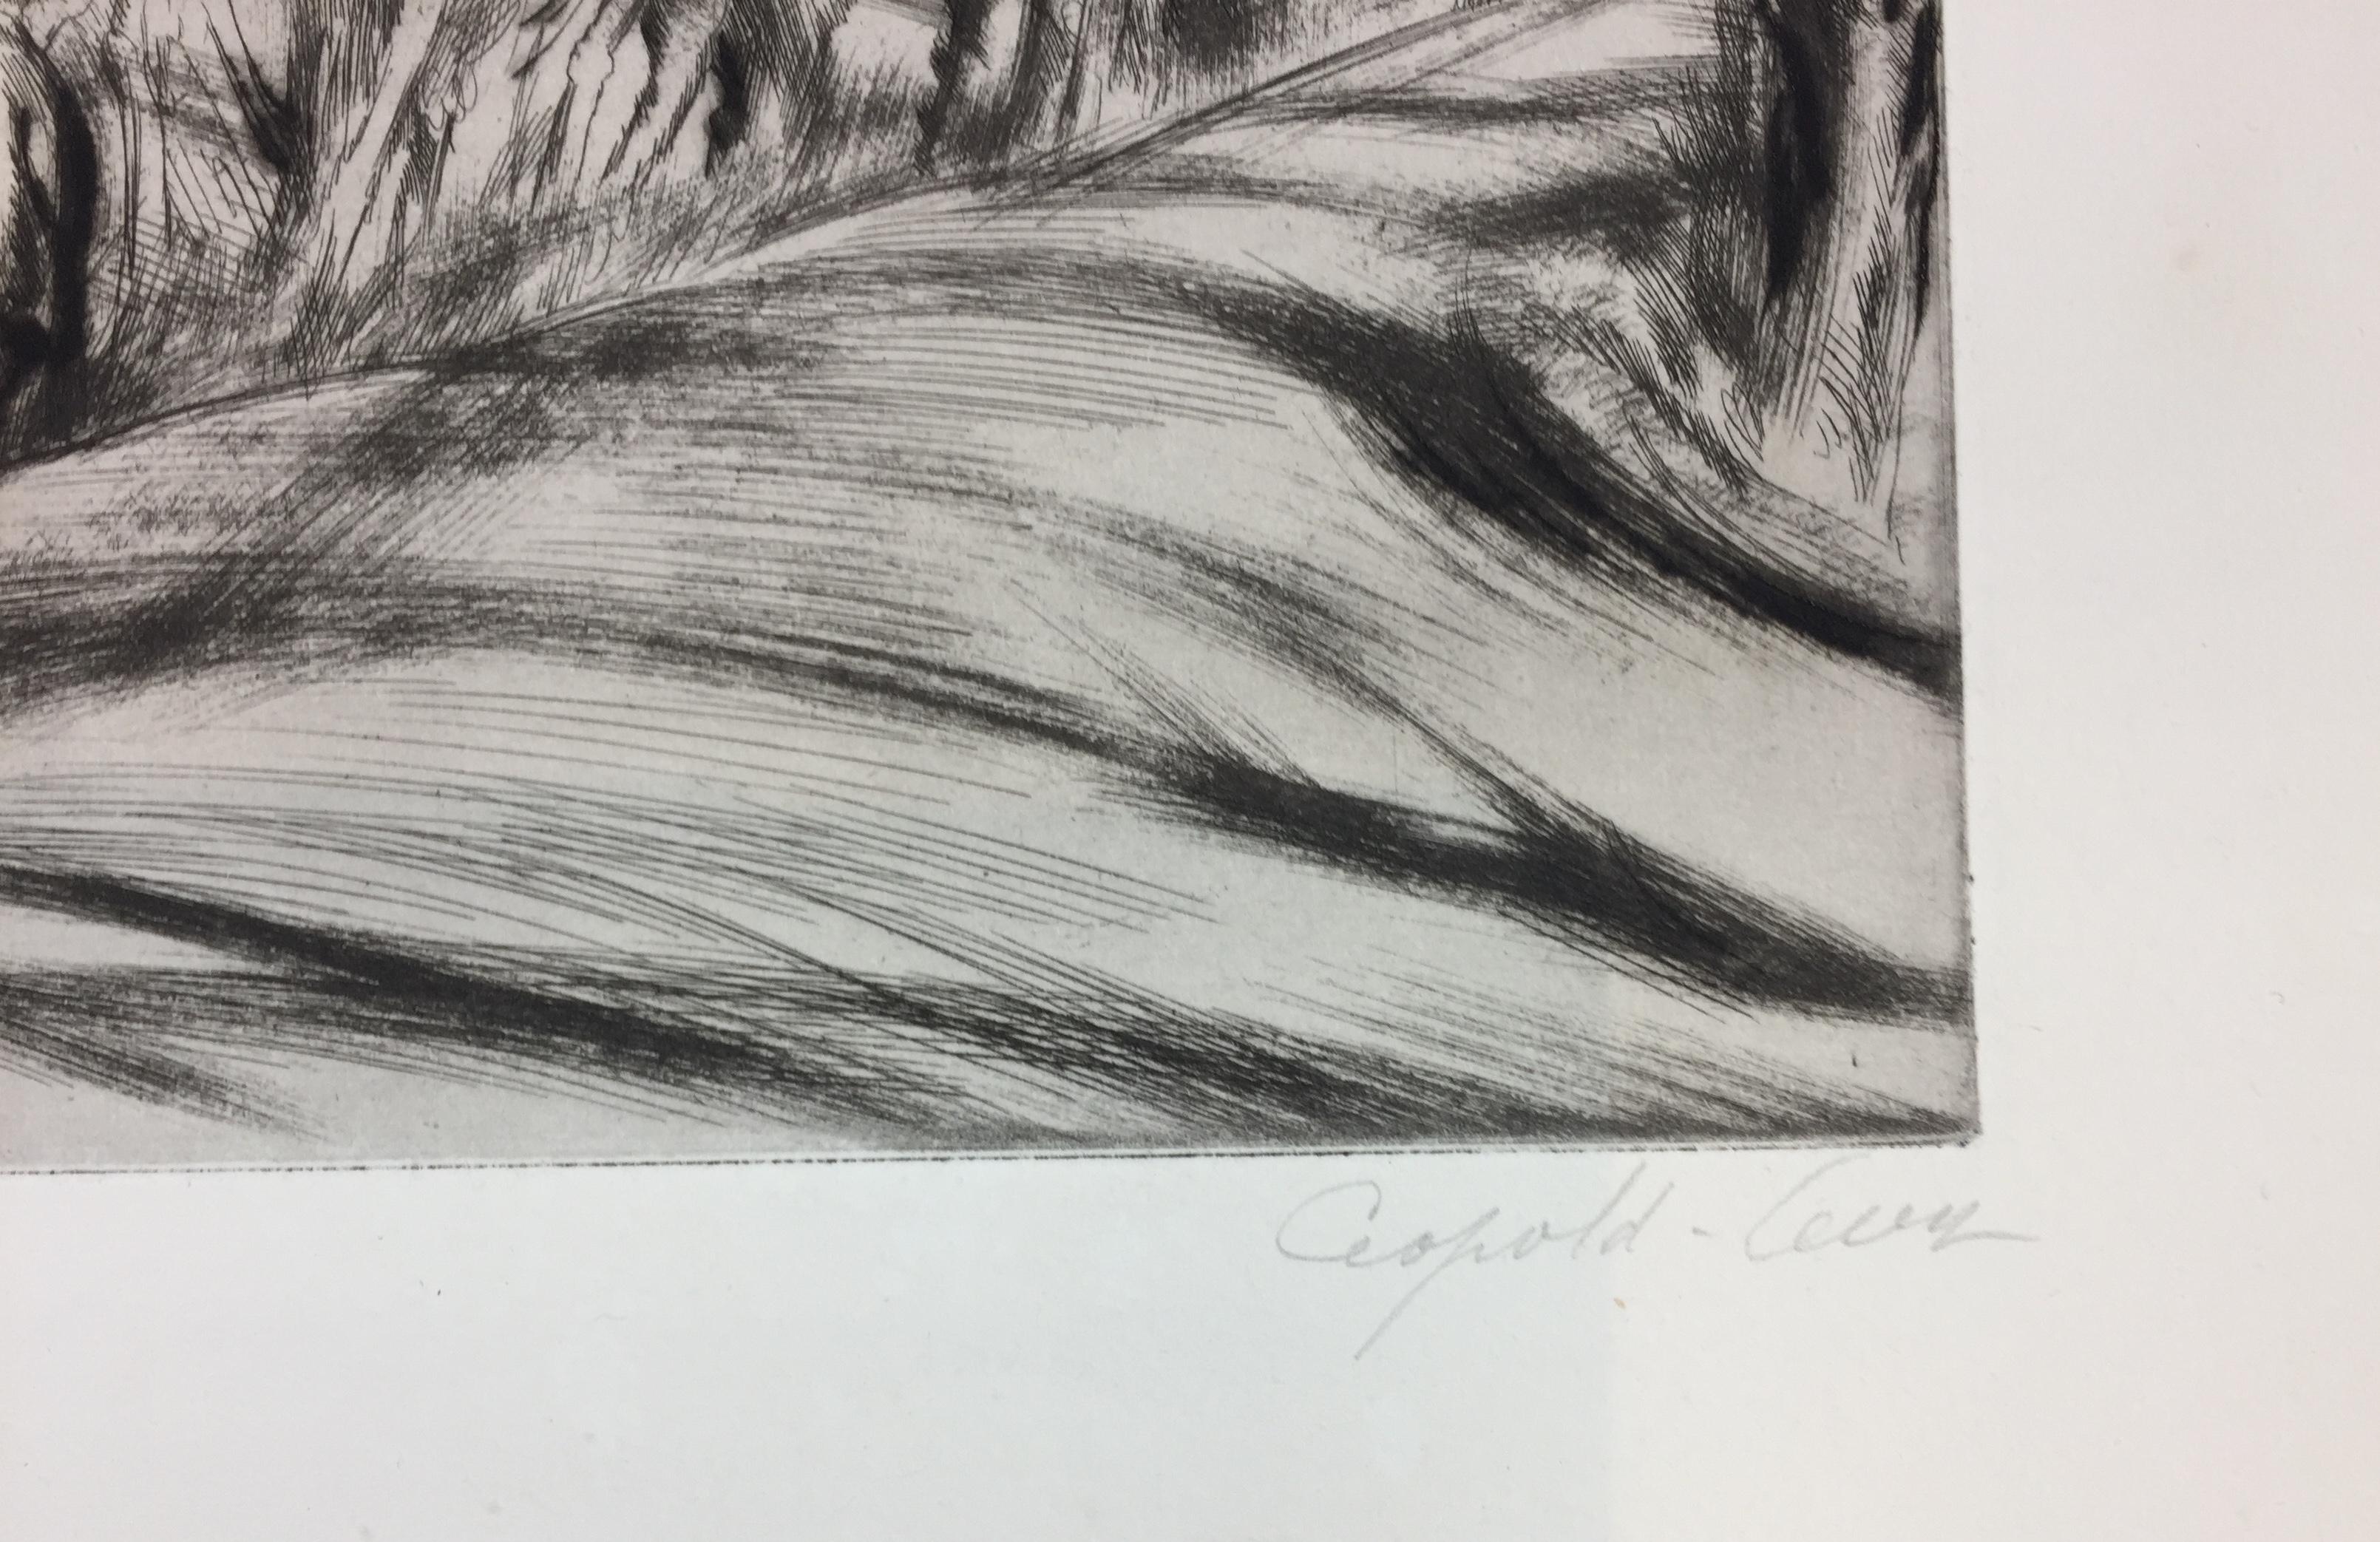 Landscape is an original artwork realized by the French artist Léopold Lévy (1882-1966) in the first half of the XX century. Etching and drypoint on paper.

Hand-signed by the artist on the lower right corner; signed on plate on the lower left